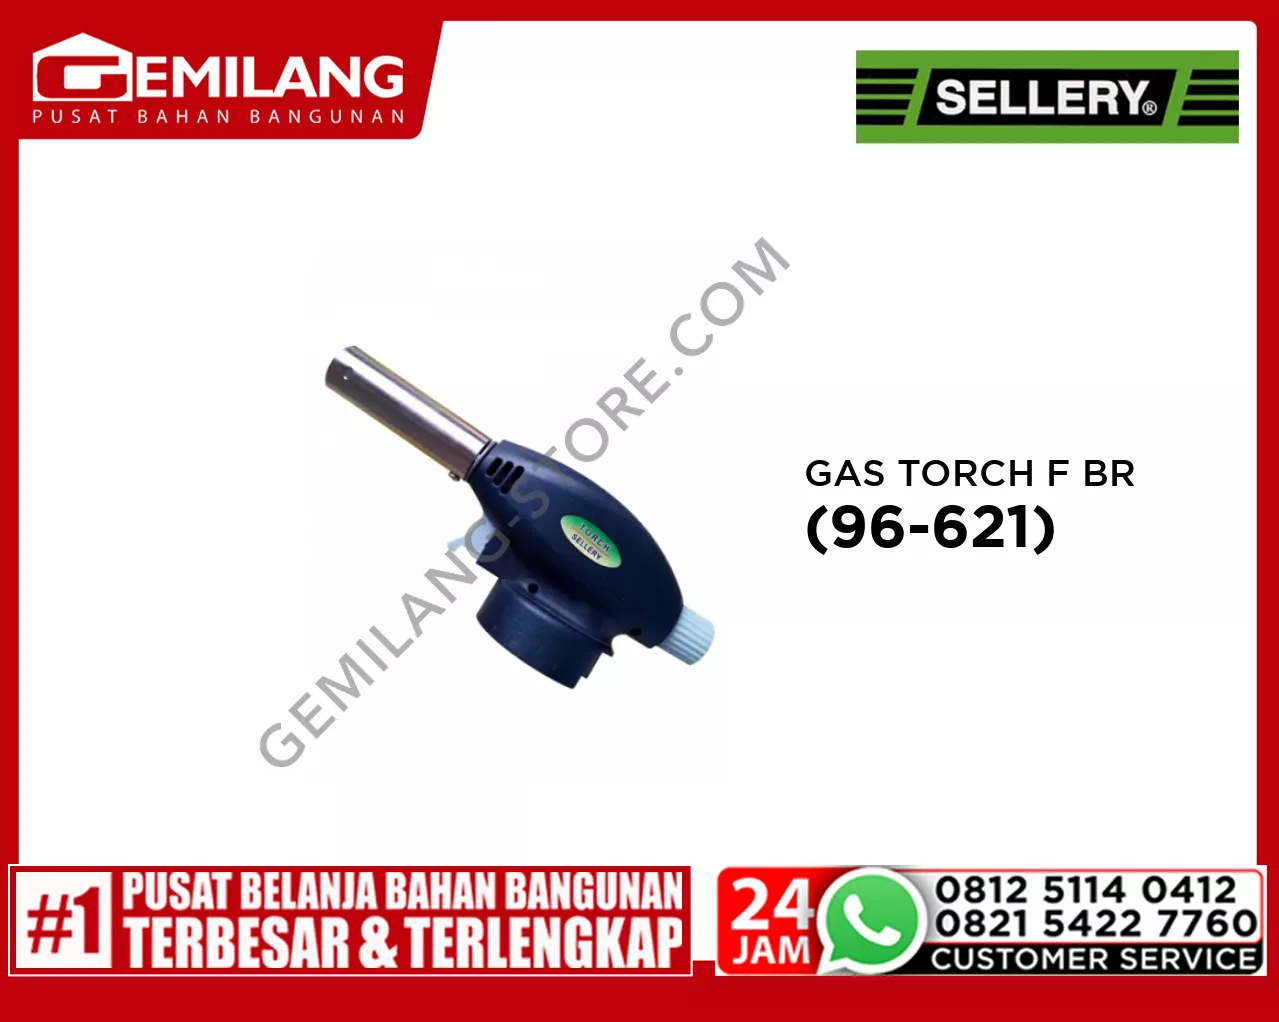 SELLERY GAS TORCH F BR (96-621)